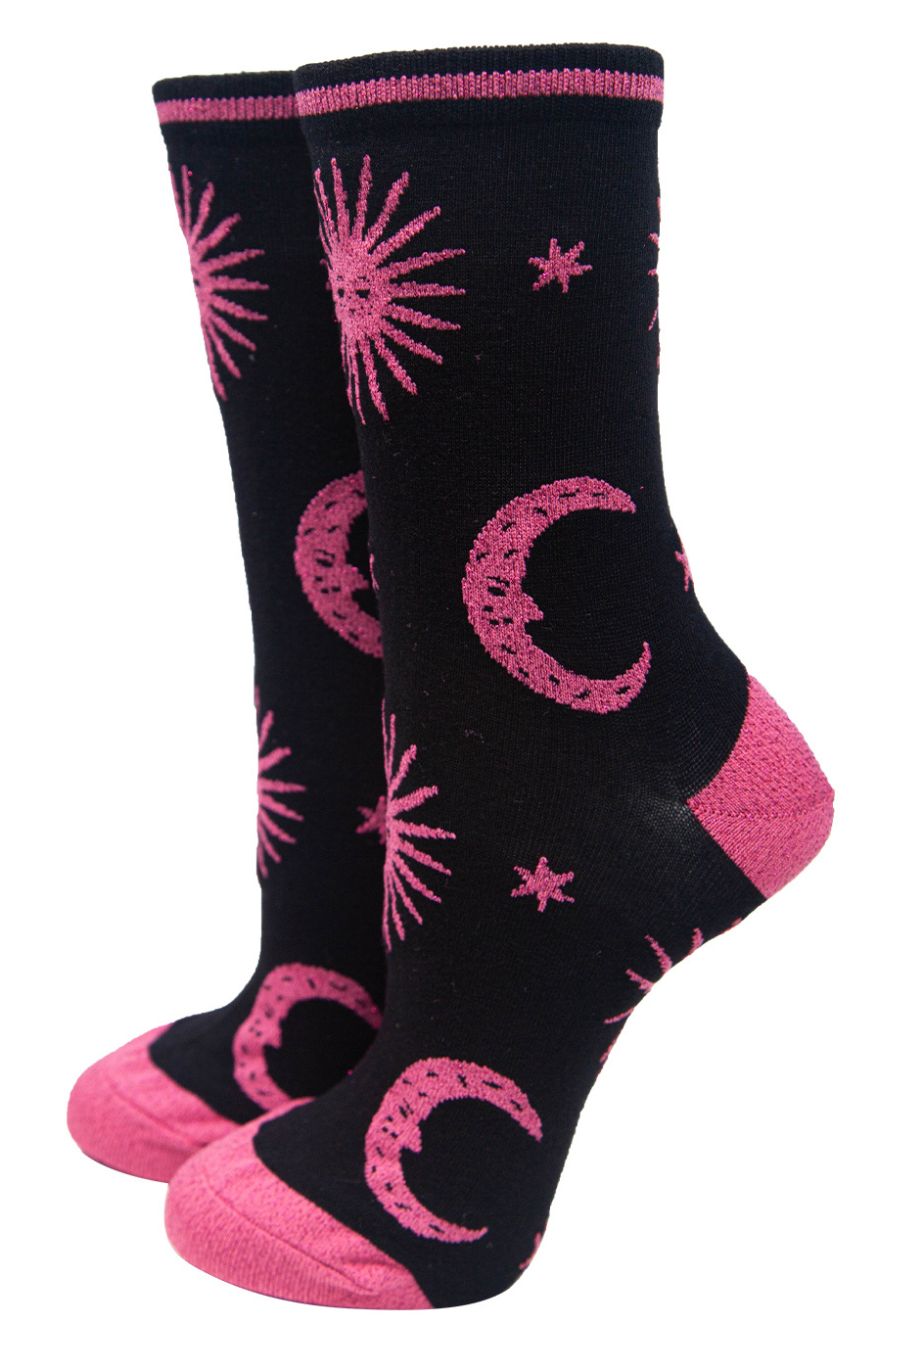 black ankle socks with pink glitter stars and moons